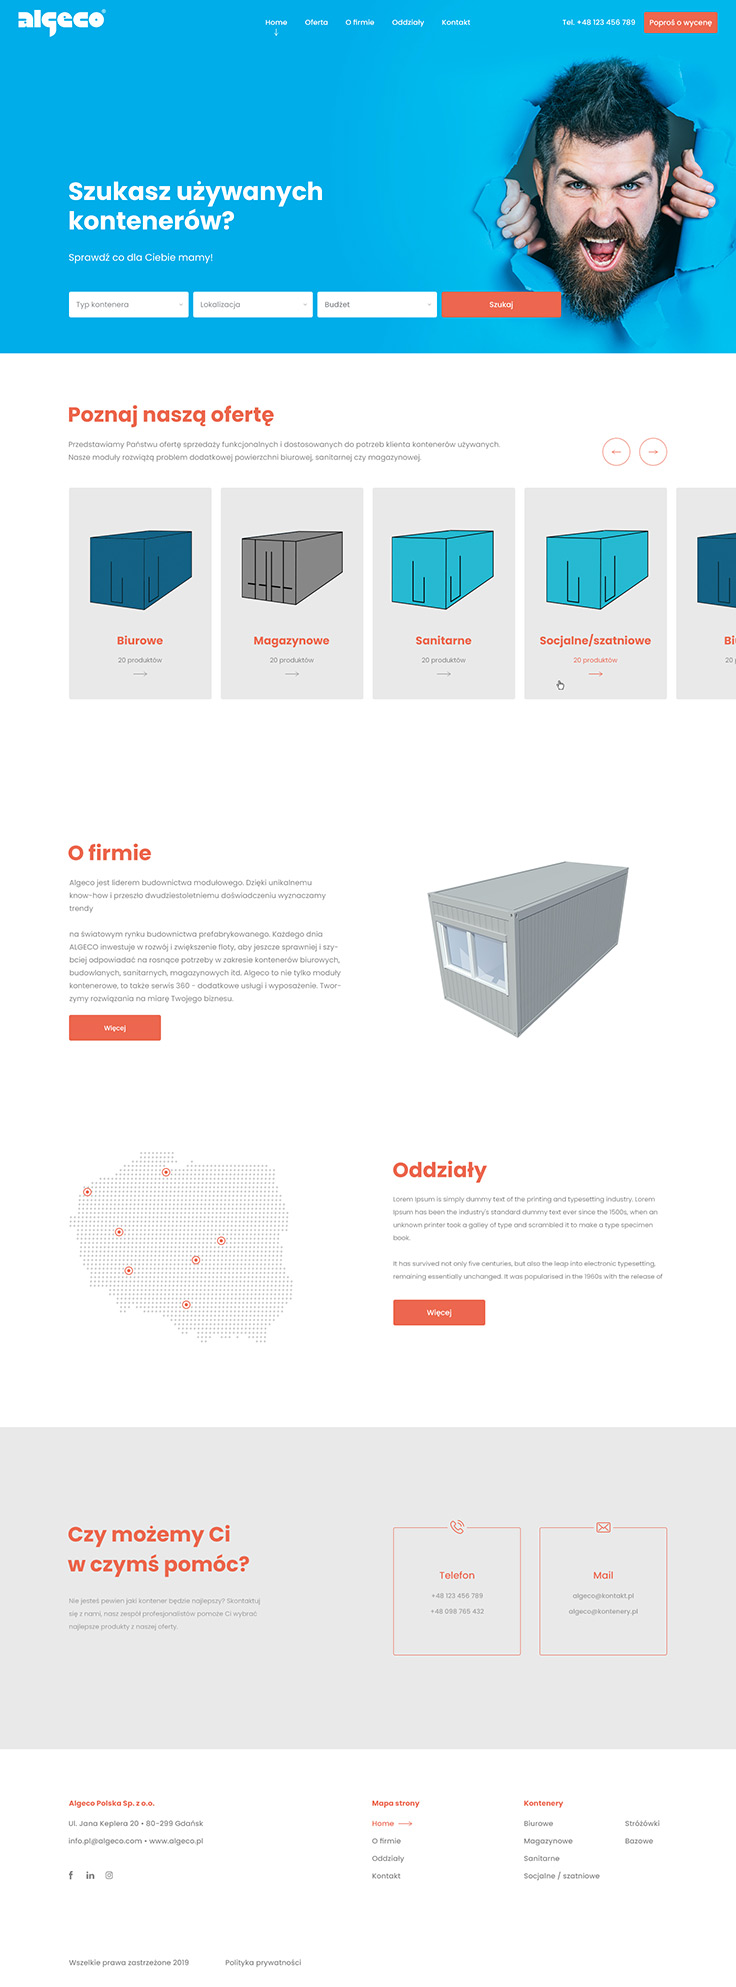 Webdesign - Algeco used containers